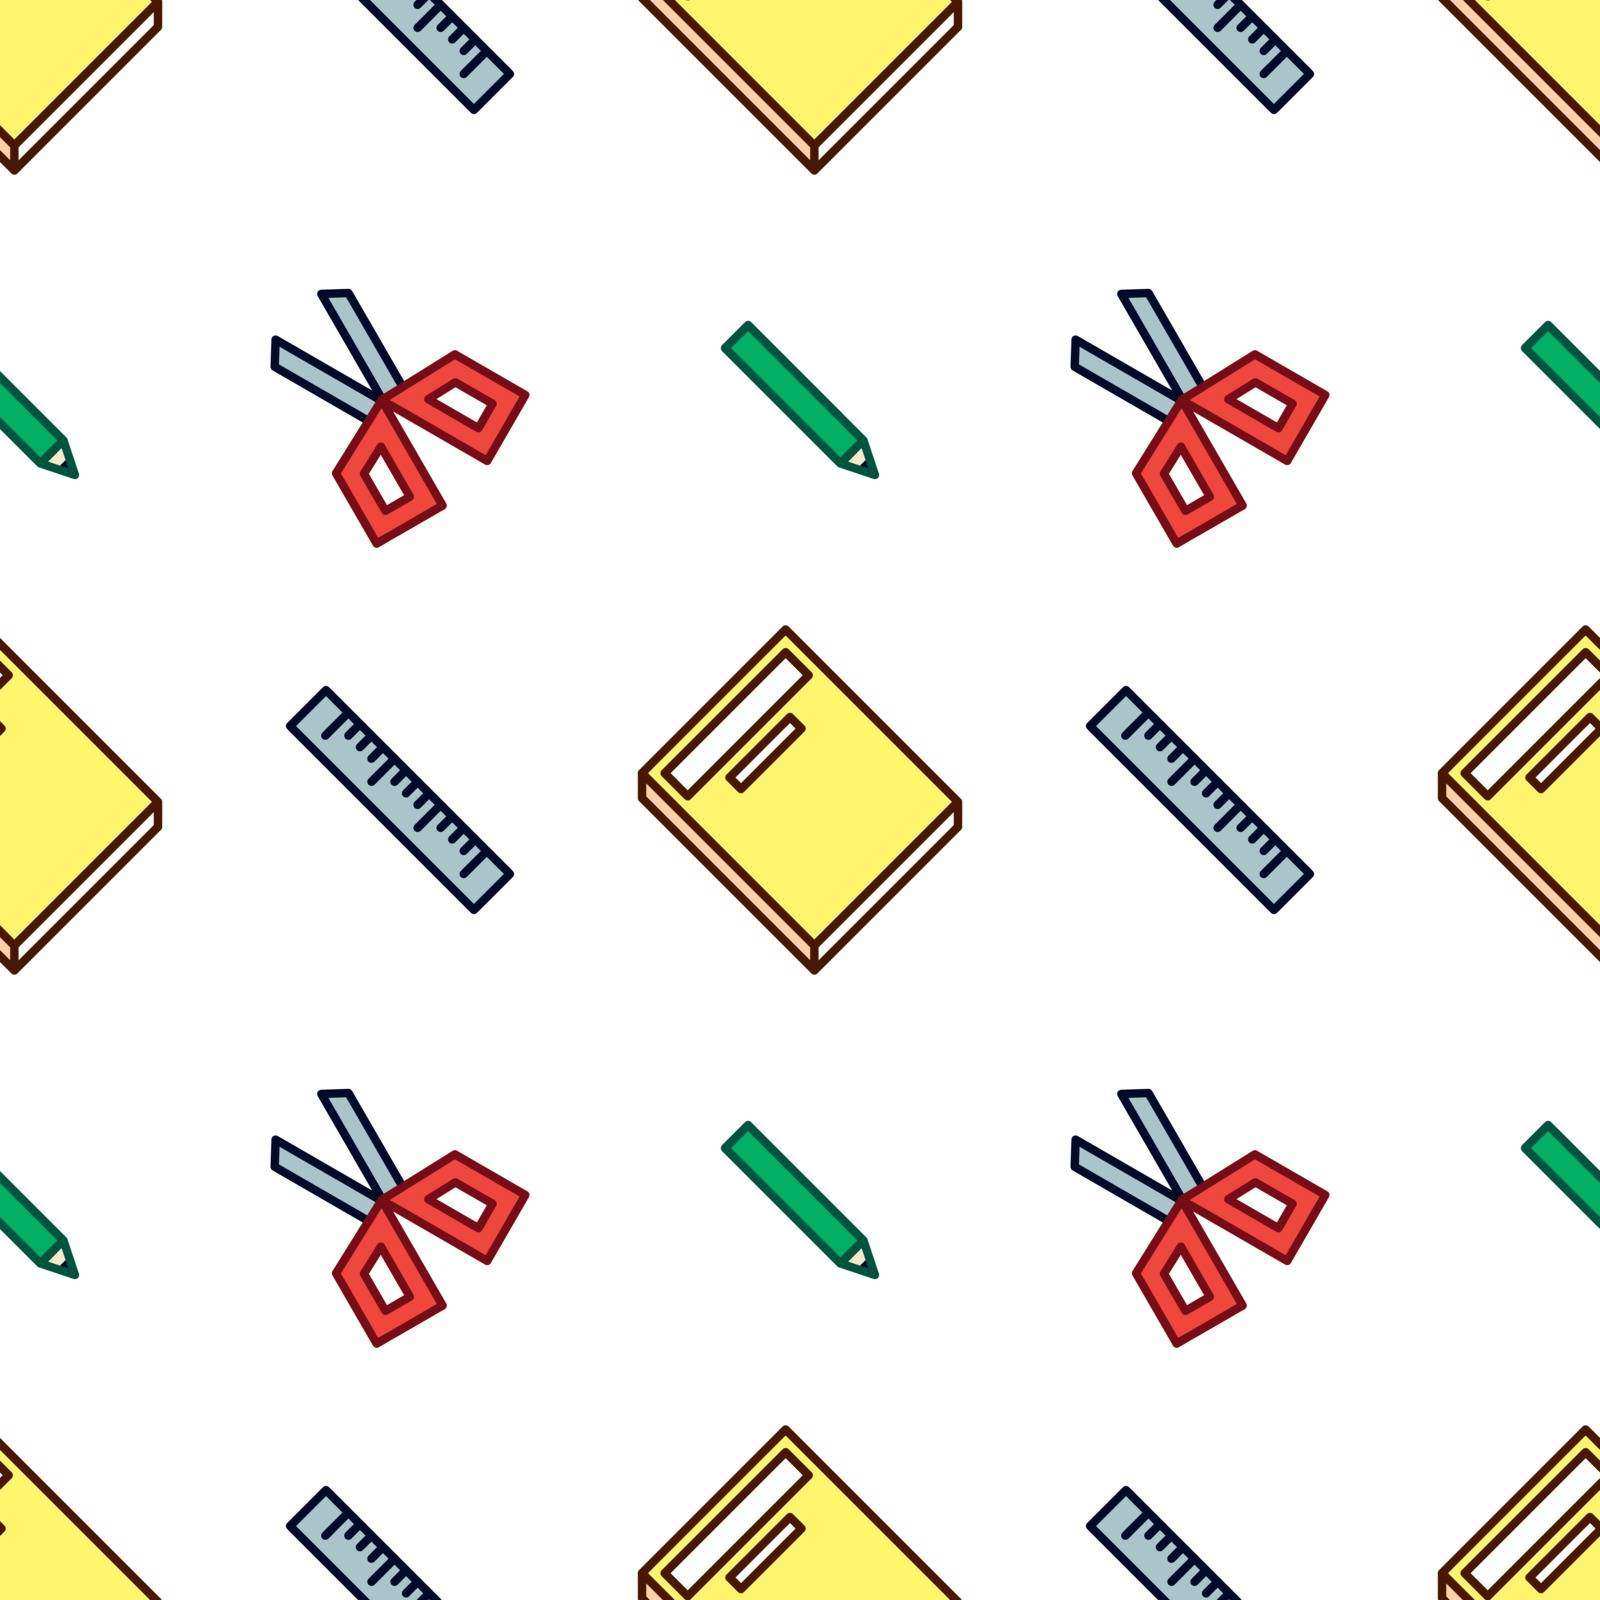 Crisp Stationery Pattern by toffees